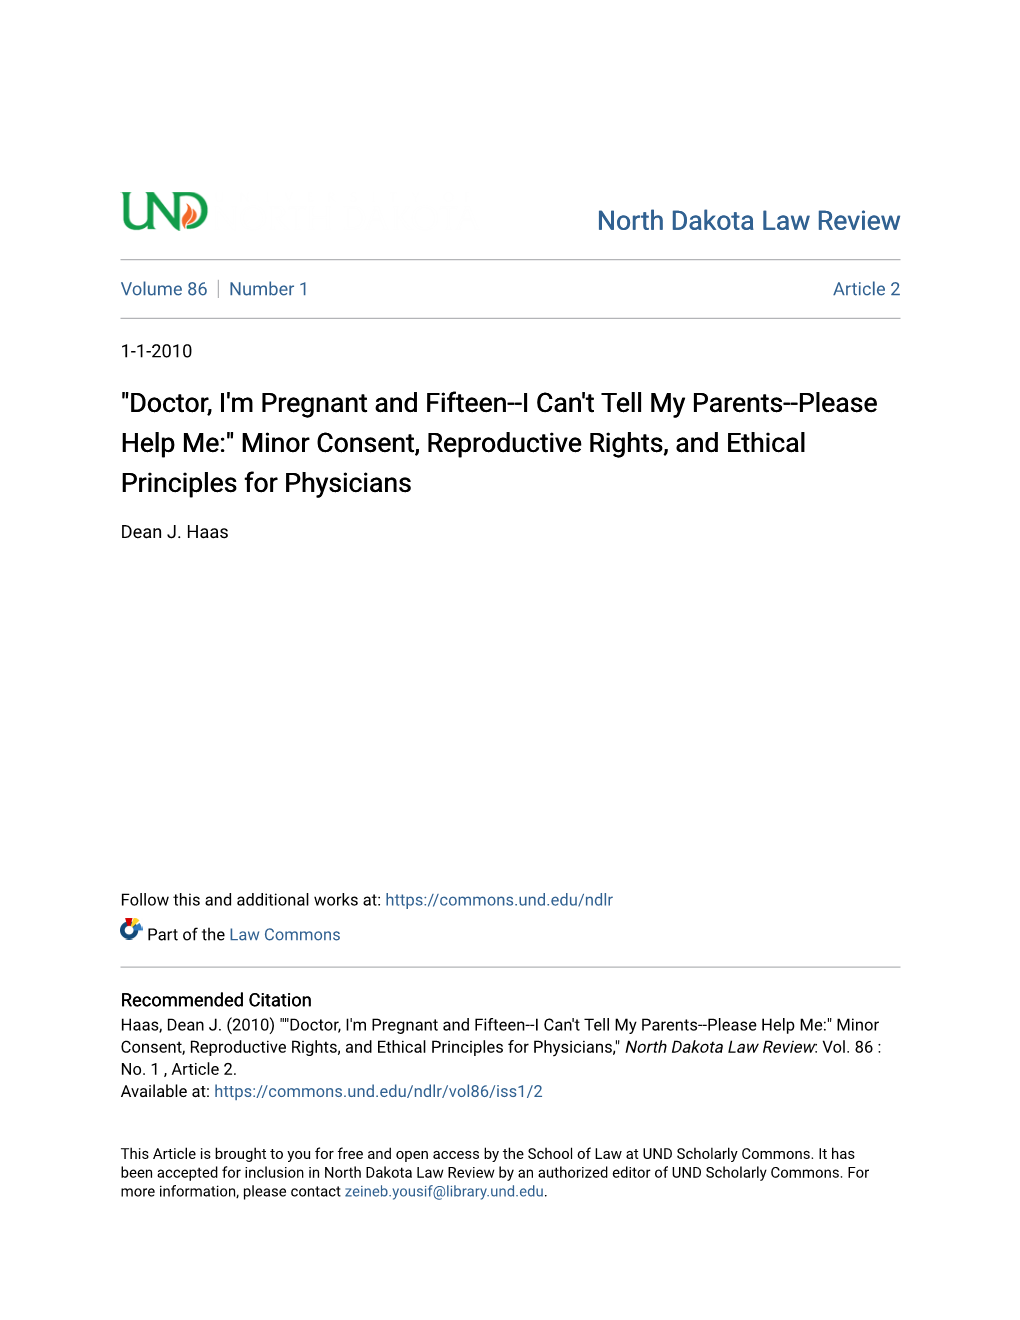 Doctor, I'm Pregnant and Fifteen--I Can't Tell My Parents--Please Help Me:" Minor Consent, Reproductive Rights, and Ethical Principles for Physicians